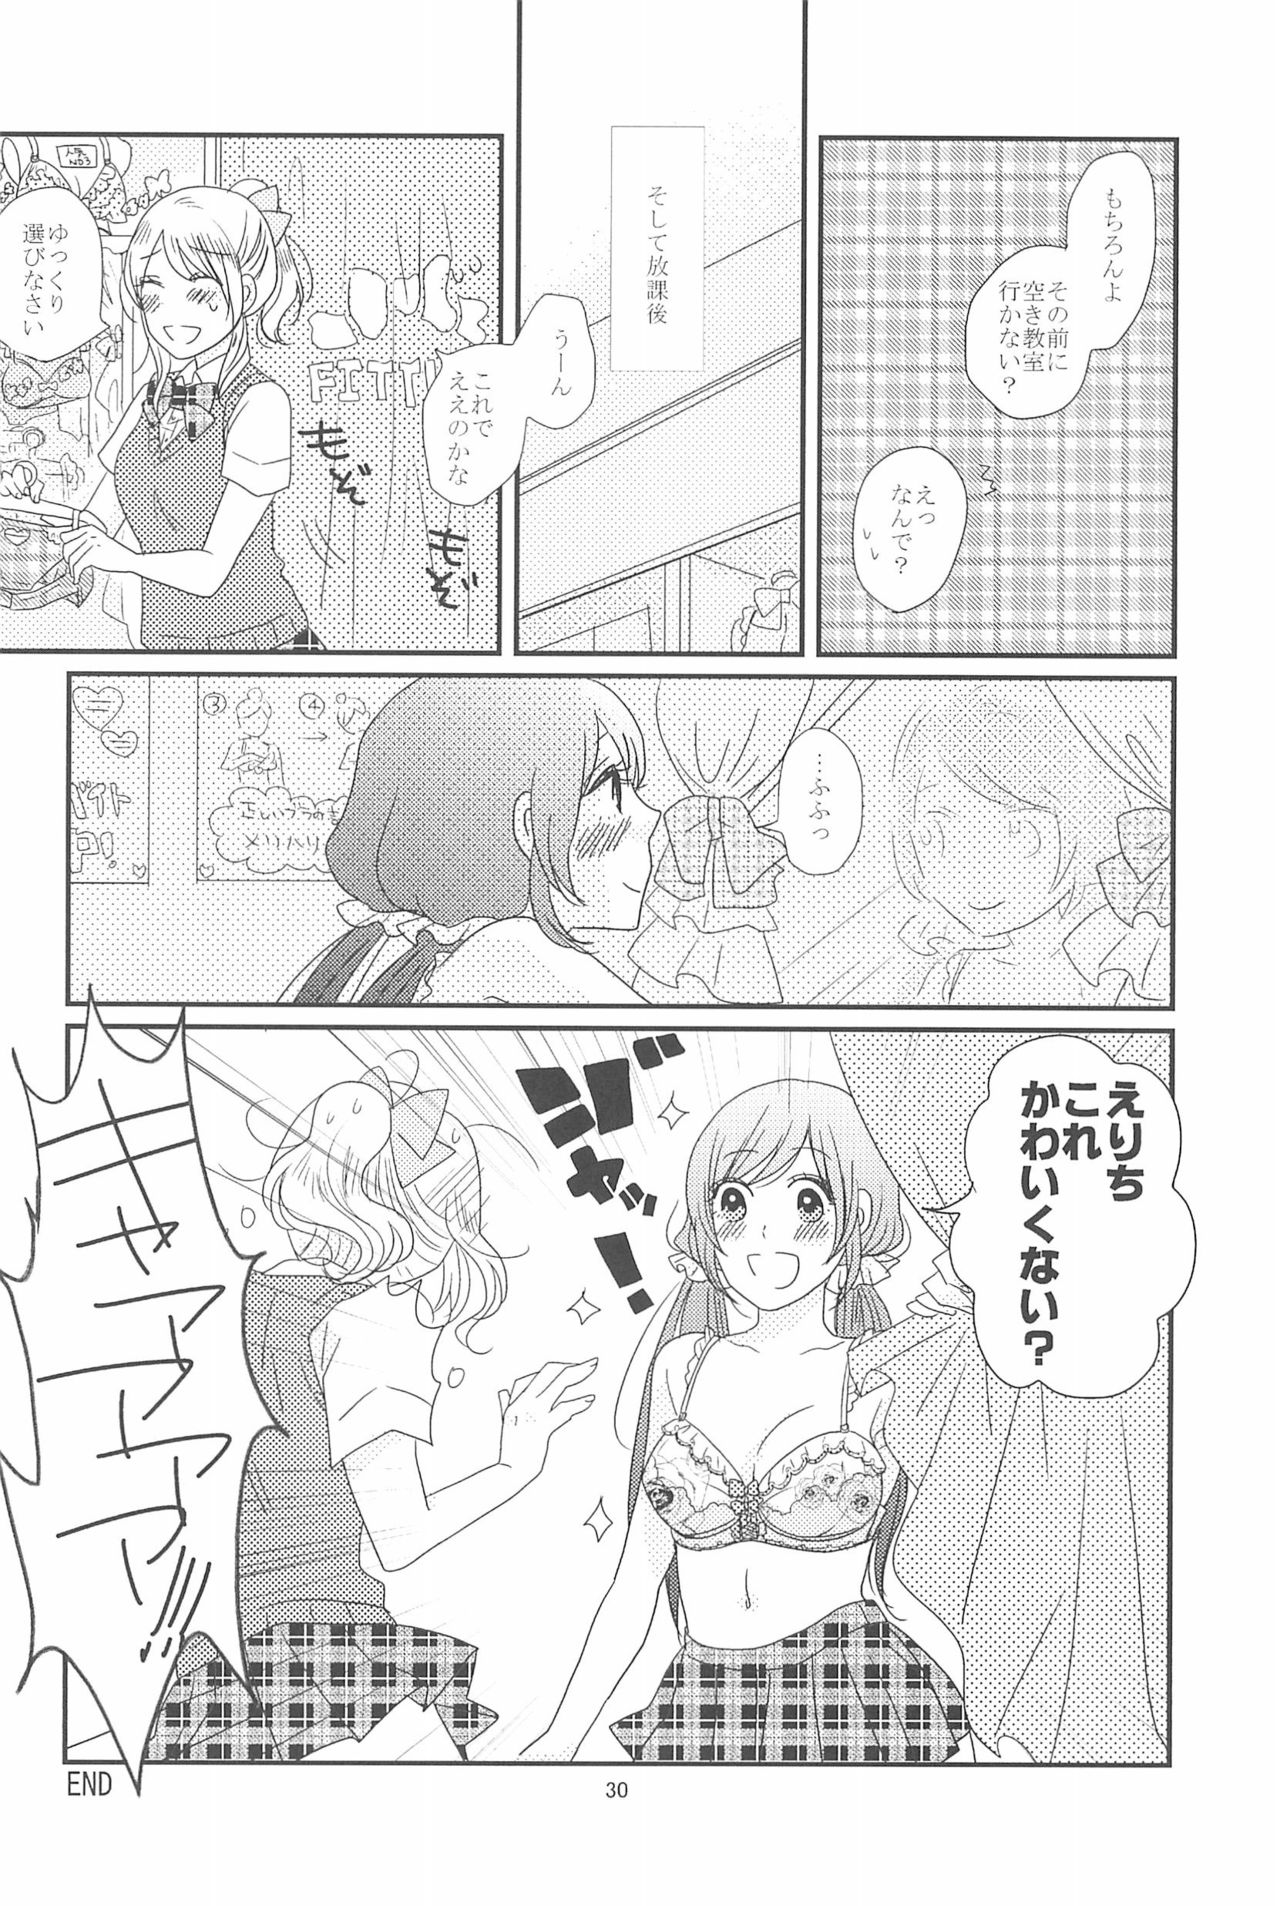 (C90) [BK*N2 (Mikawa Miso)] HAPPY GO LUCKY DAYS (Love Live!) page 34 full